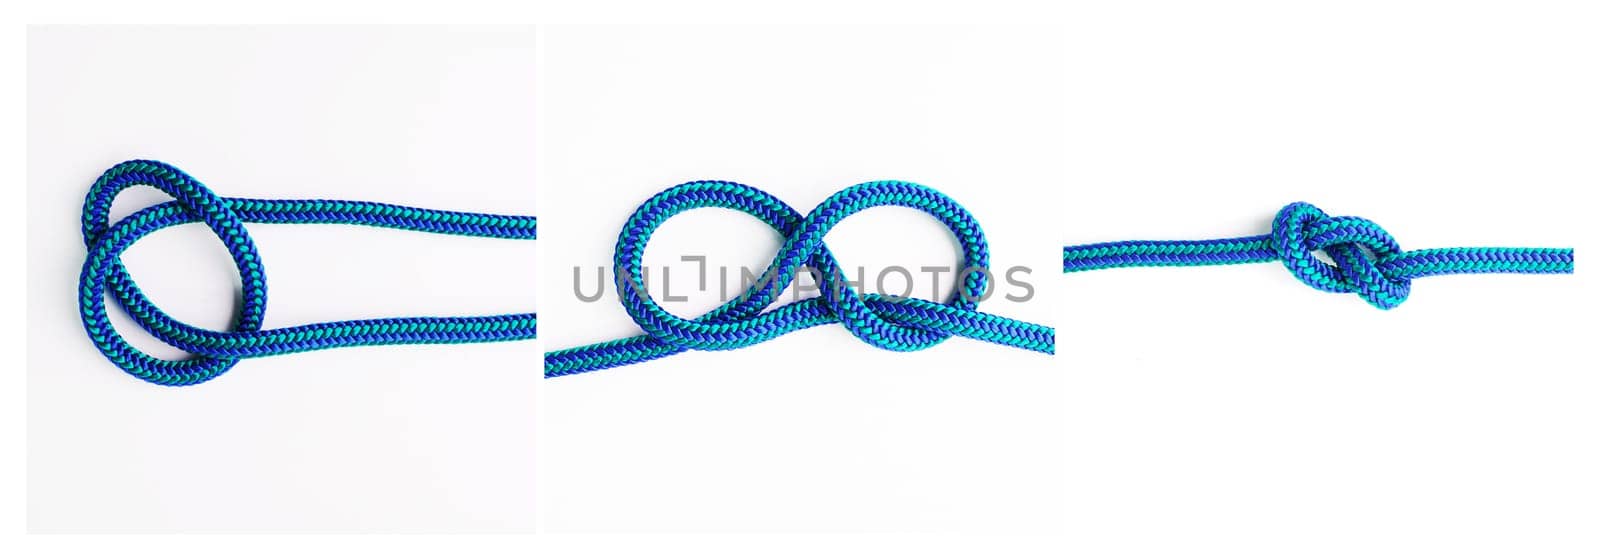 knot, instruction or steps to tie ropes and material on white background in studio for security. Frames, cords or blue design for learning technique, gear tools or safety for survival guide lesson by YuriArcurs